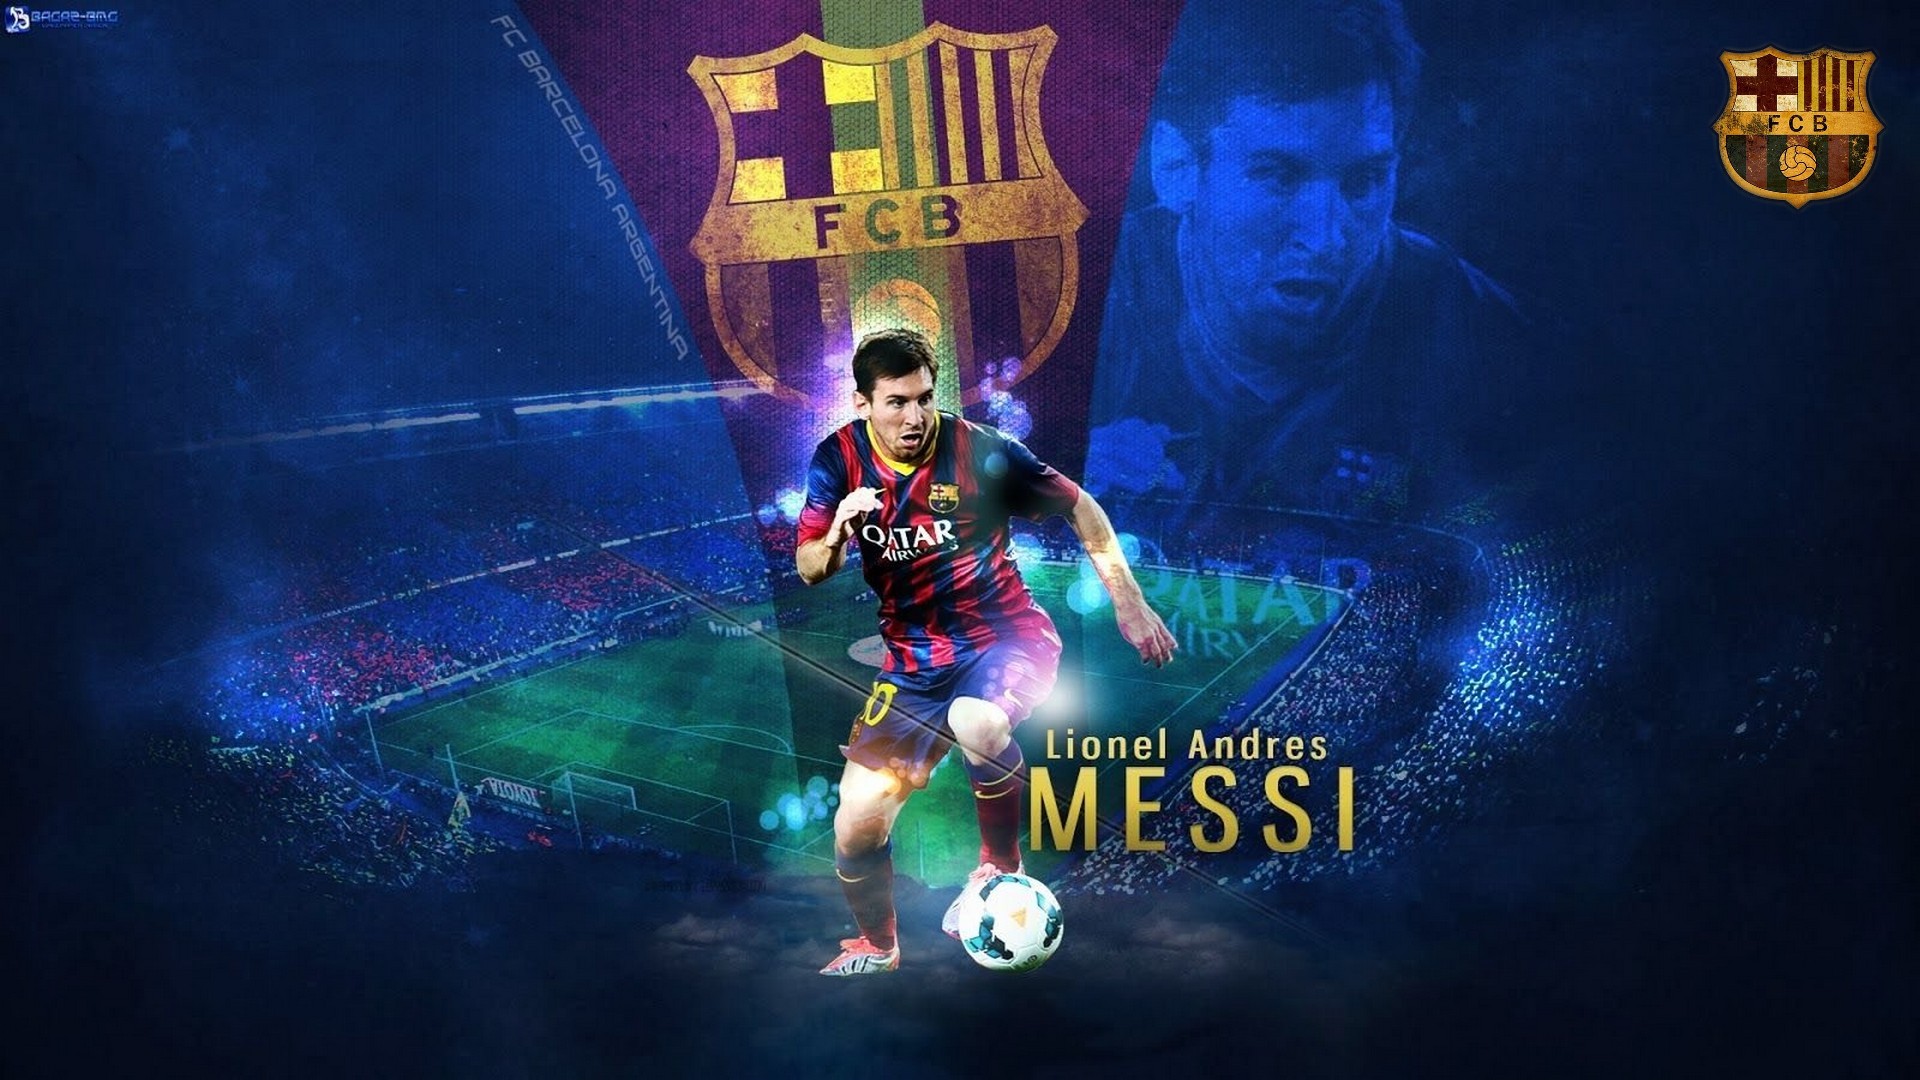 Windows Wallpaper Lionel Messi With Resolution 1920X1080 pixel. You can make this wallpaper for your Mac or Windows Desktop Background, iPhone, Android or Tablet and another Smartphone device for free